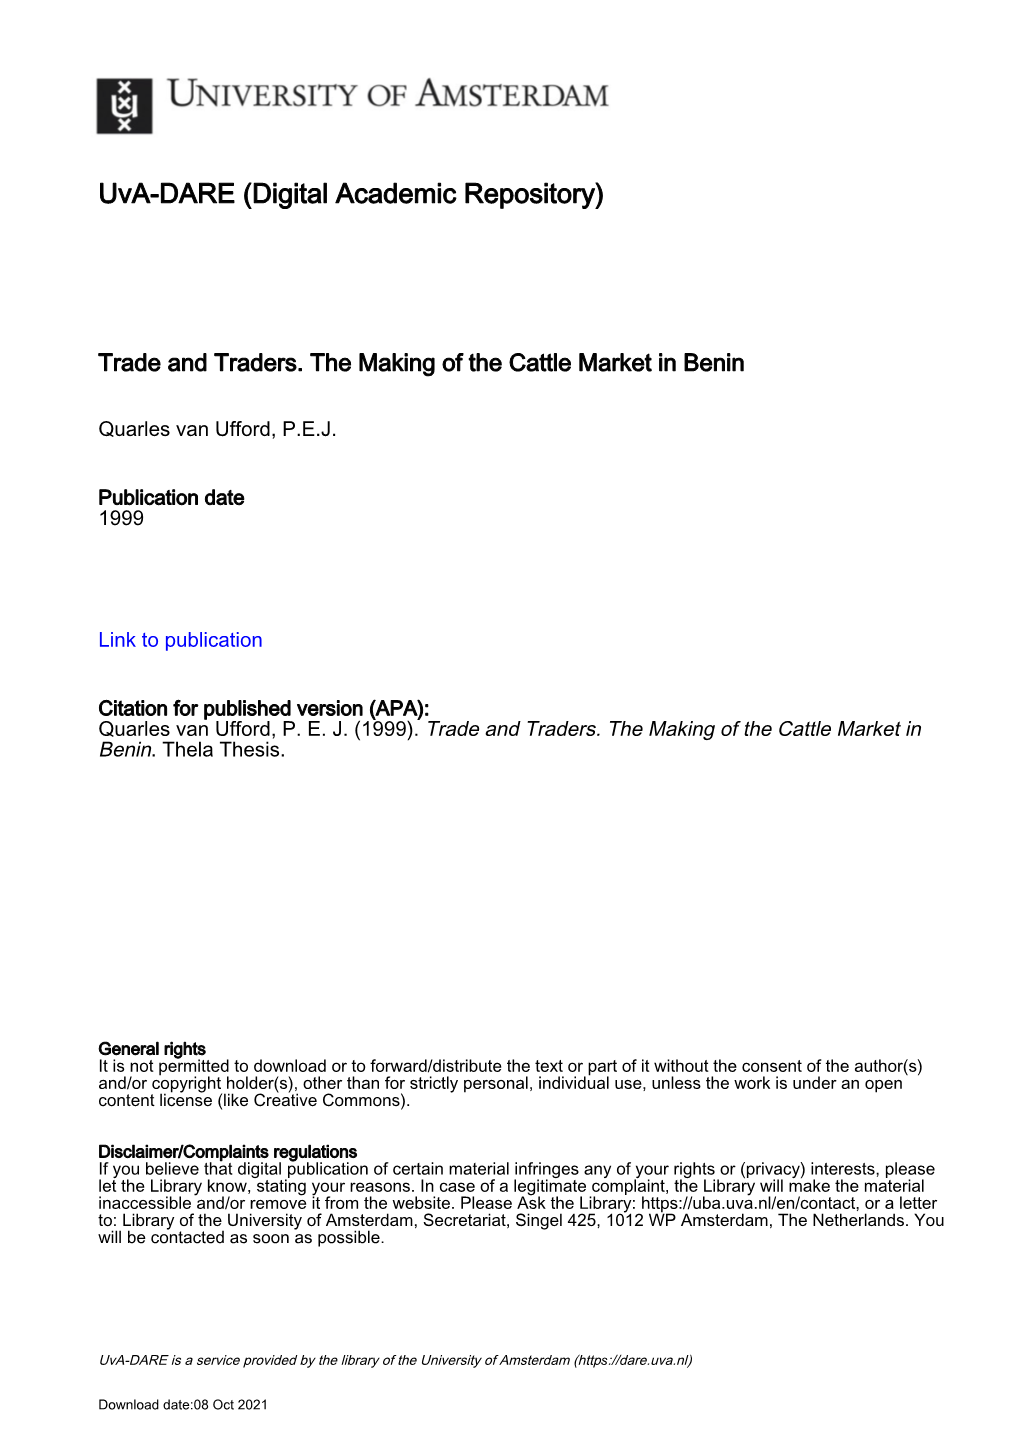 Strategies of Cattle Traders